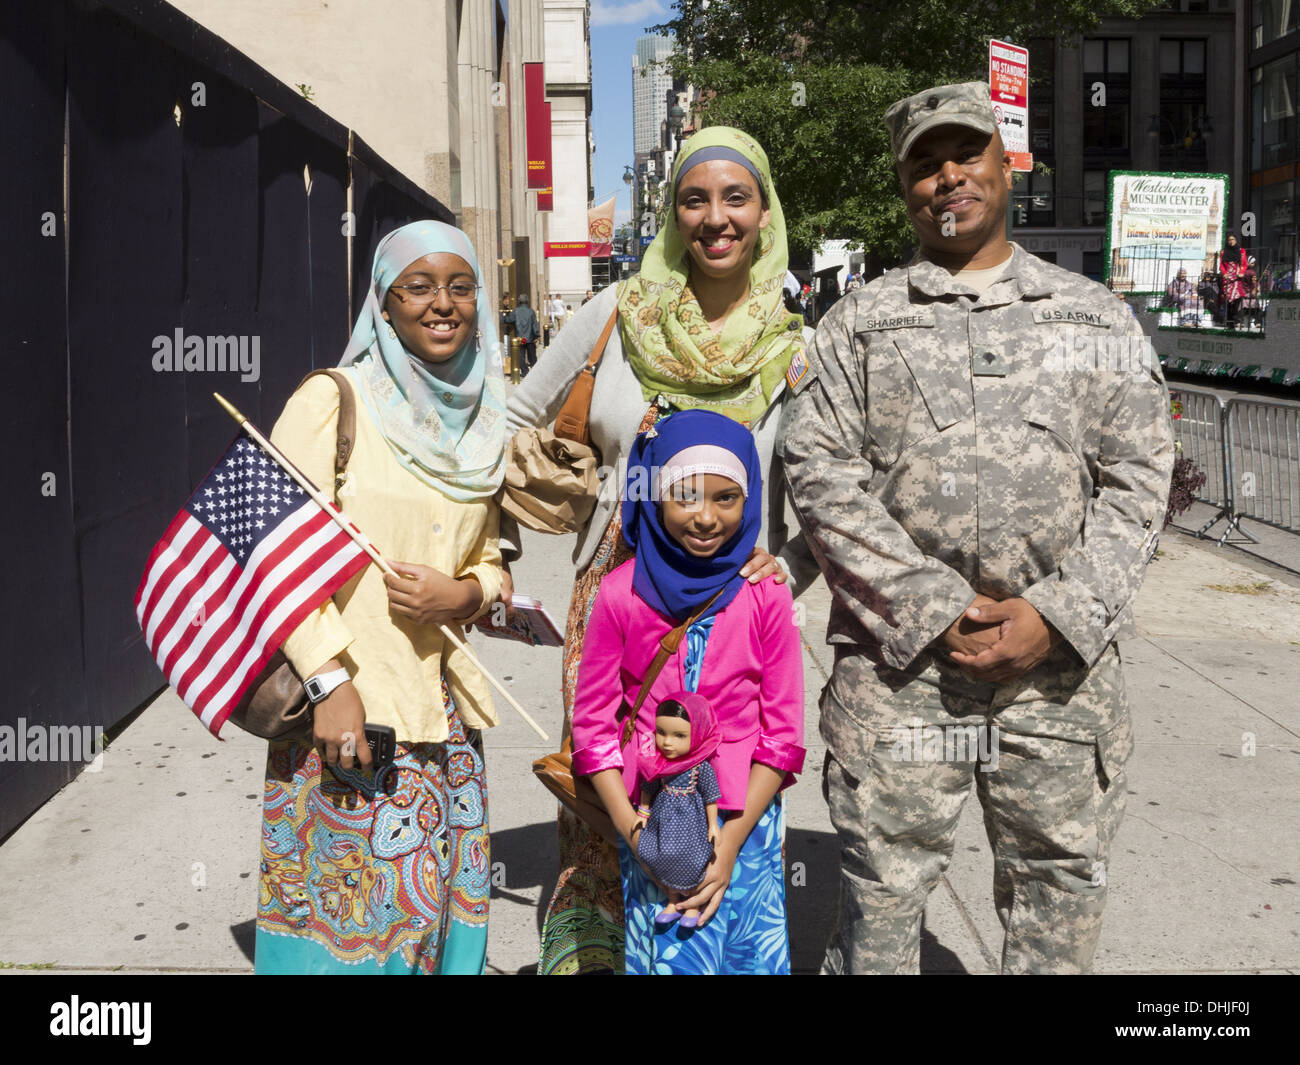 U.S. soldier from Brooklyn and his family at the Annual Muslim Day Parade, New York City, 2013. Stock Photo